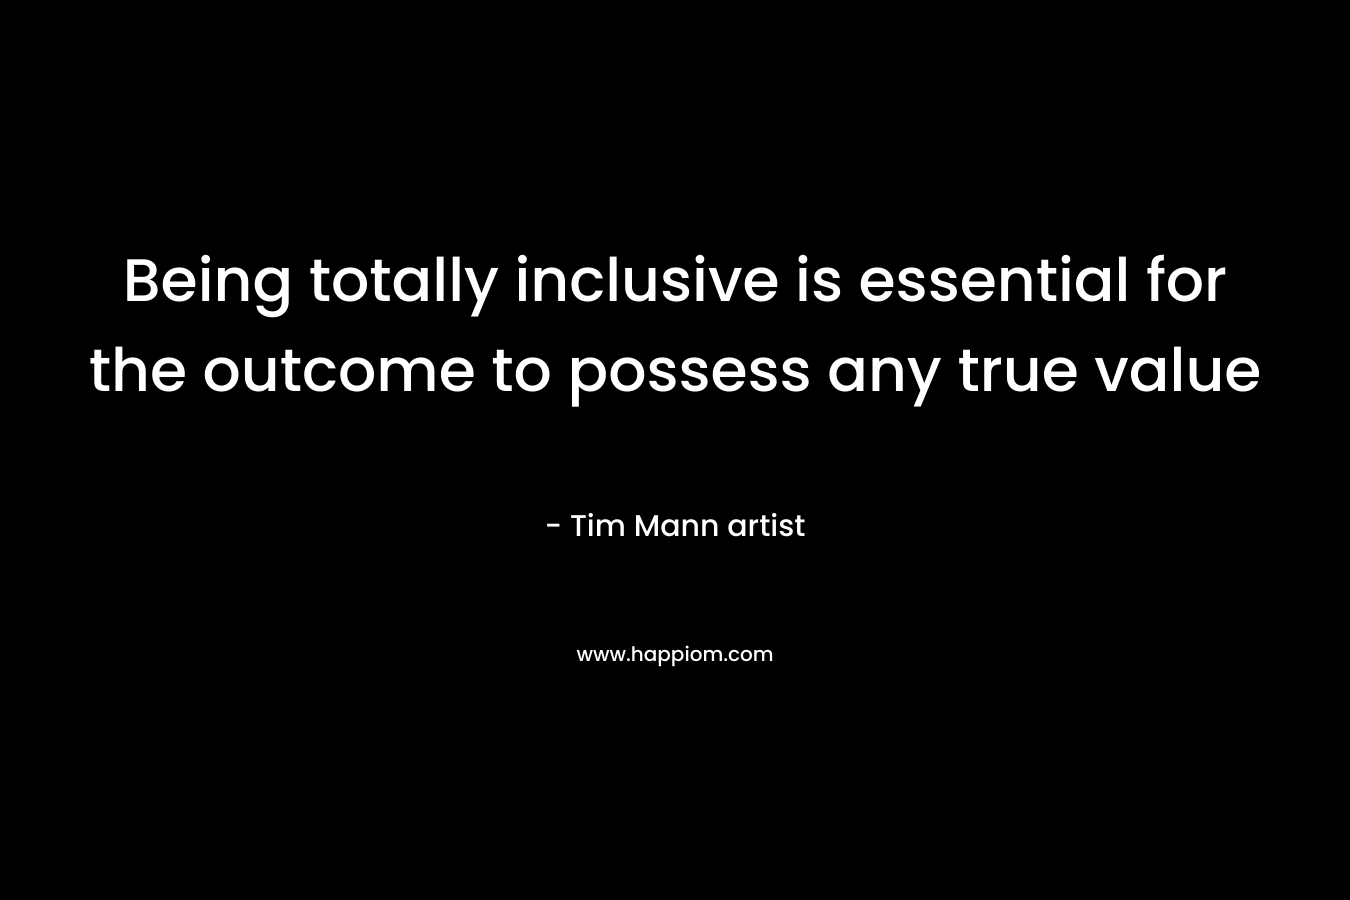 Being totally inclusive is essential for the outcome to possess any true value